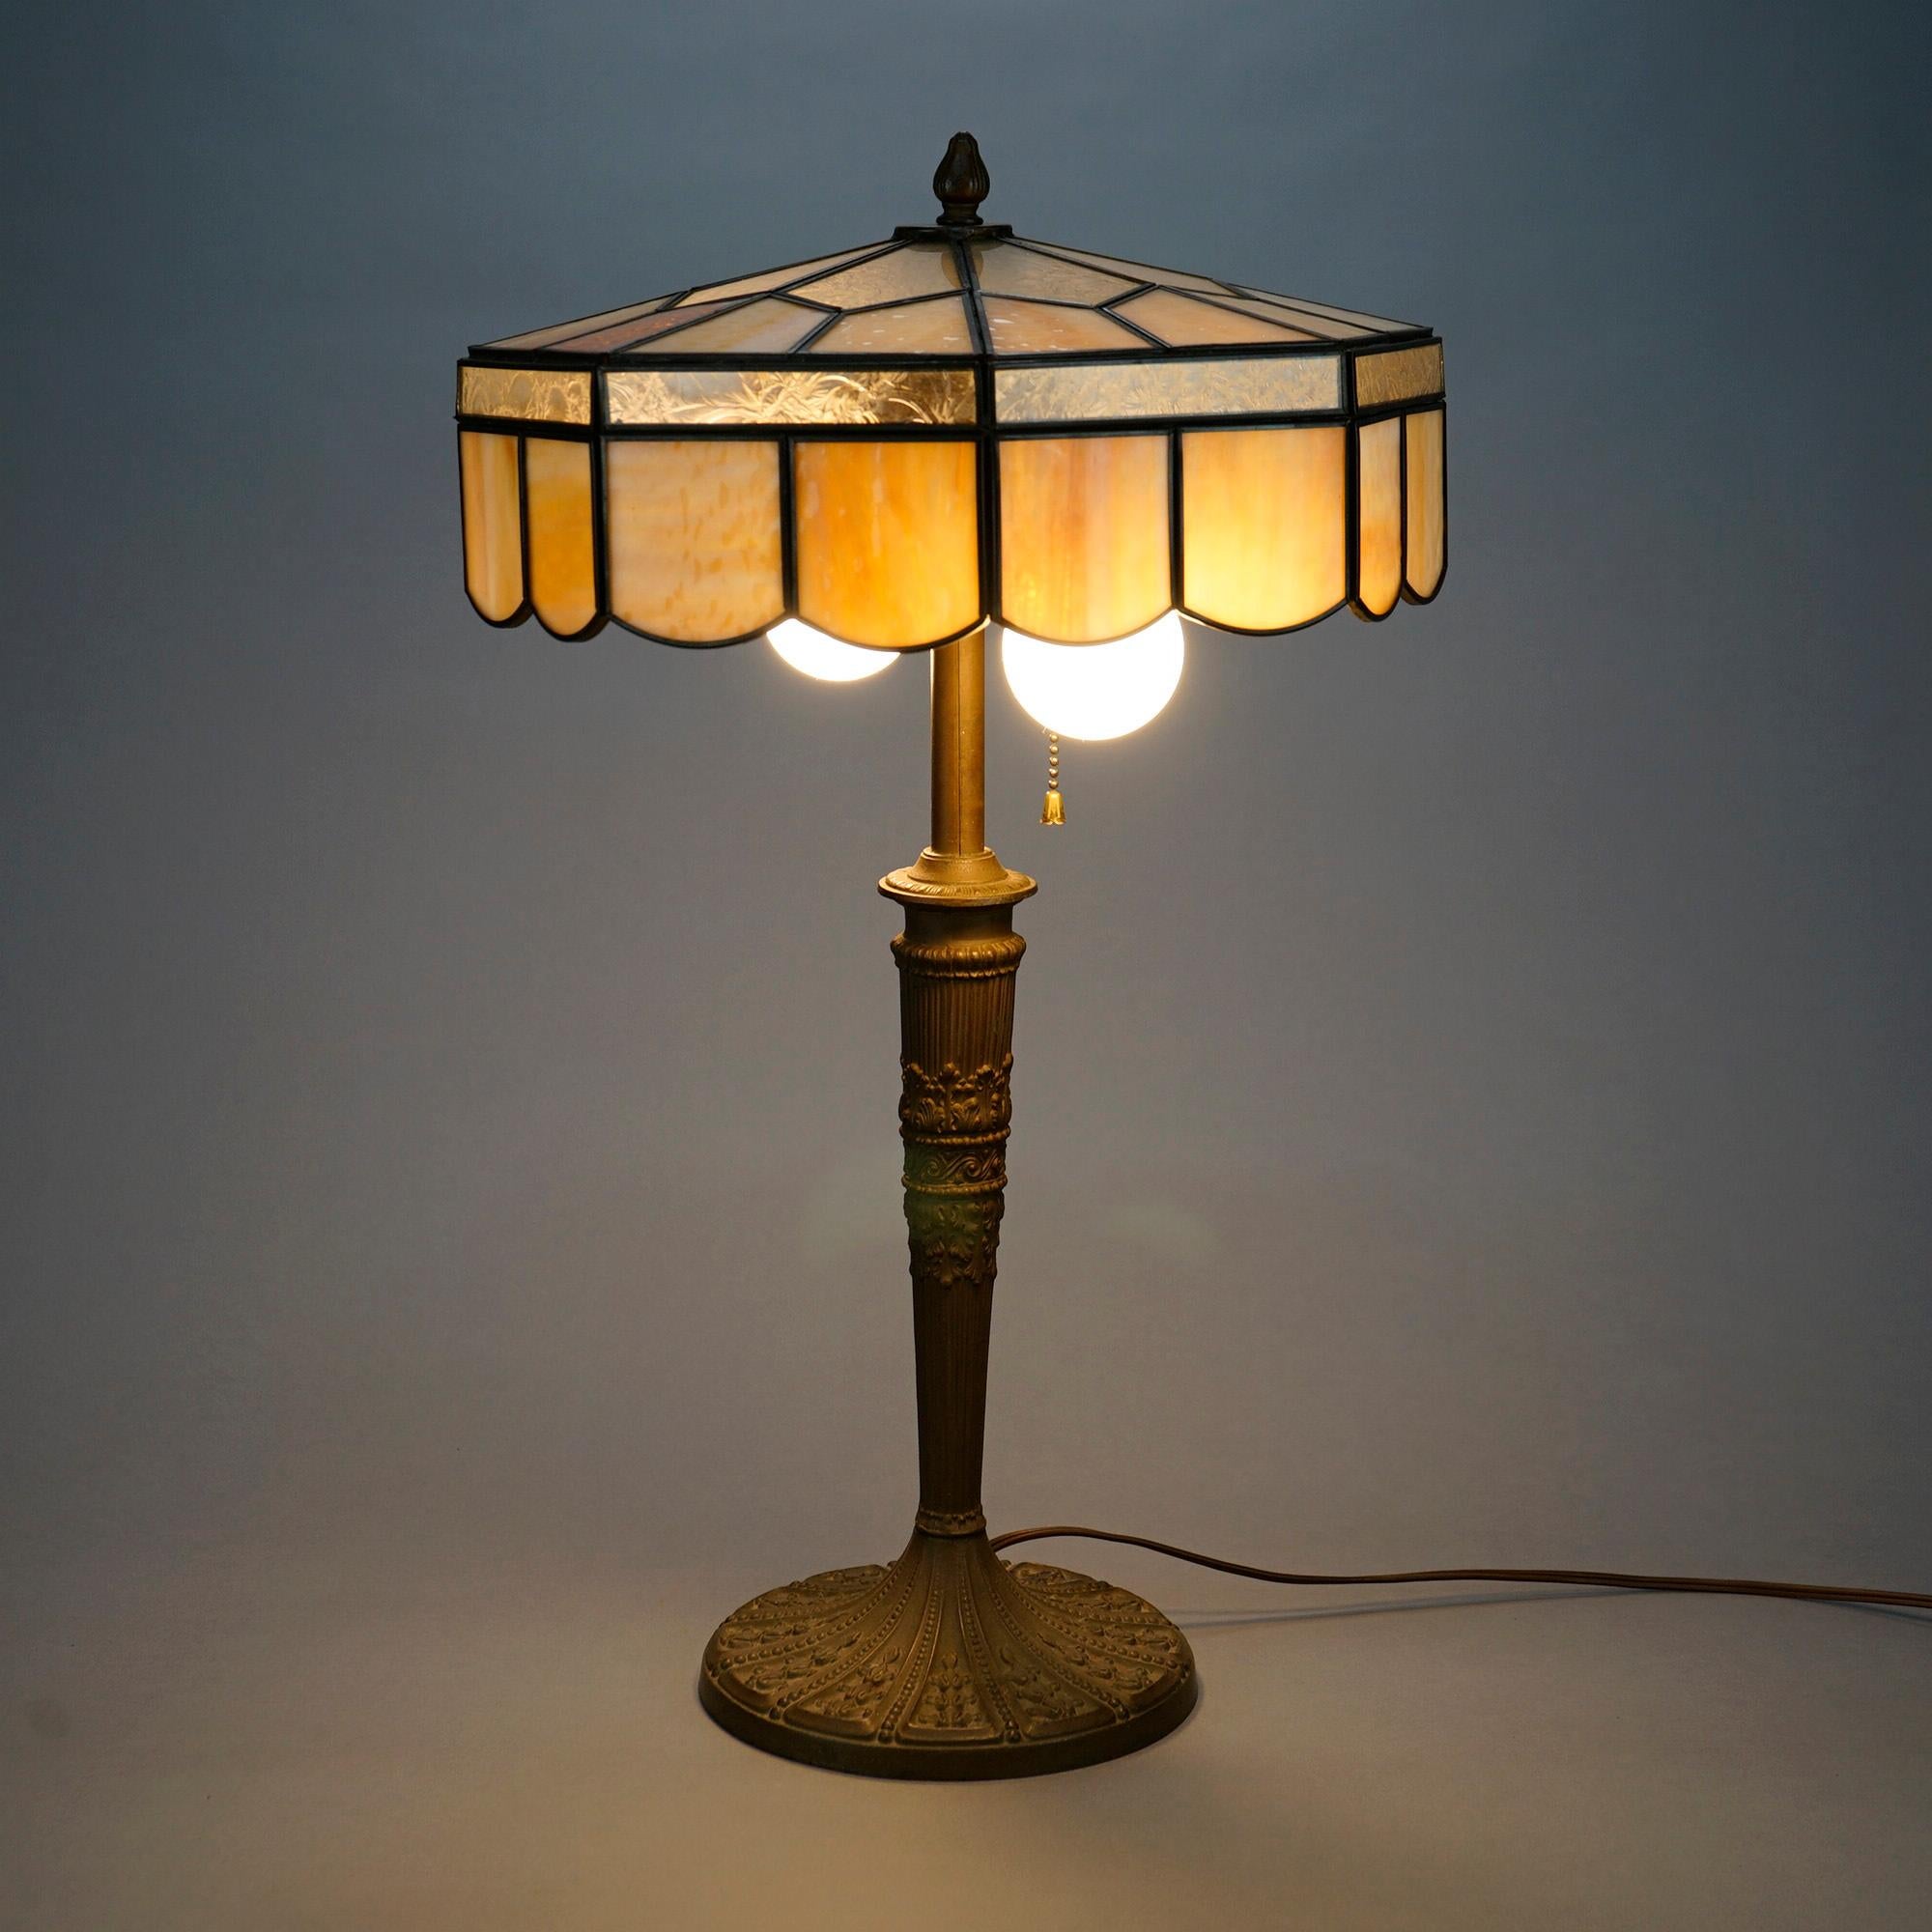 An antique Arts and Crafts table lamp in the manner of Bradley and Hubbard offers slag glass shade over double socket cast base, c1920

Measures- 22.5'' H x 12.75'' W x 12.75'' D.